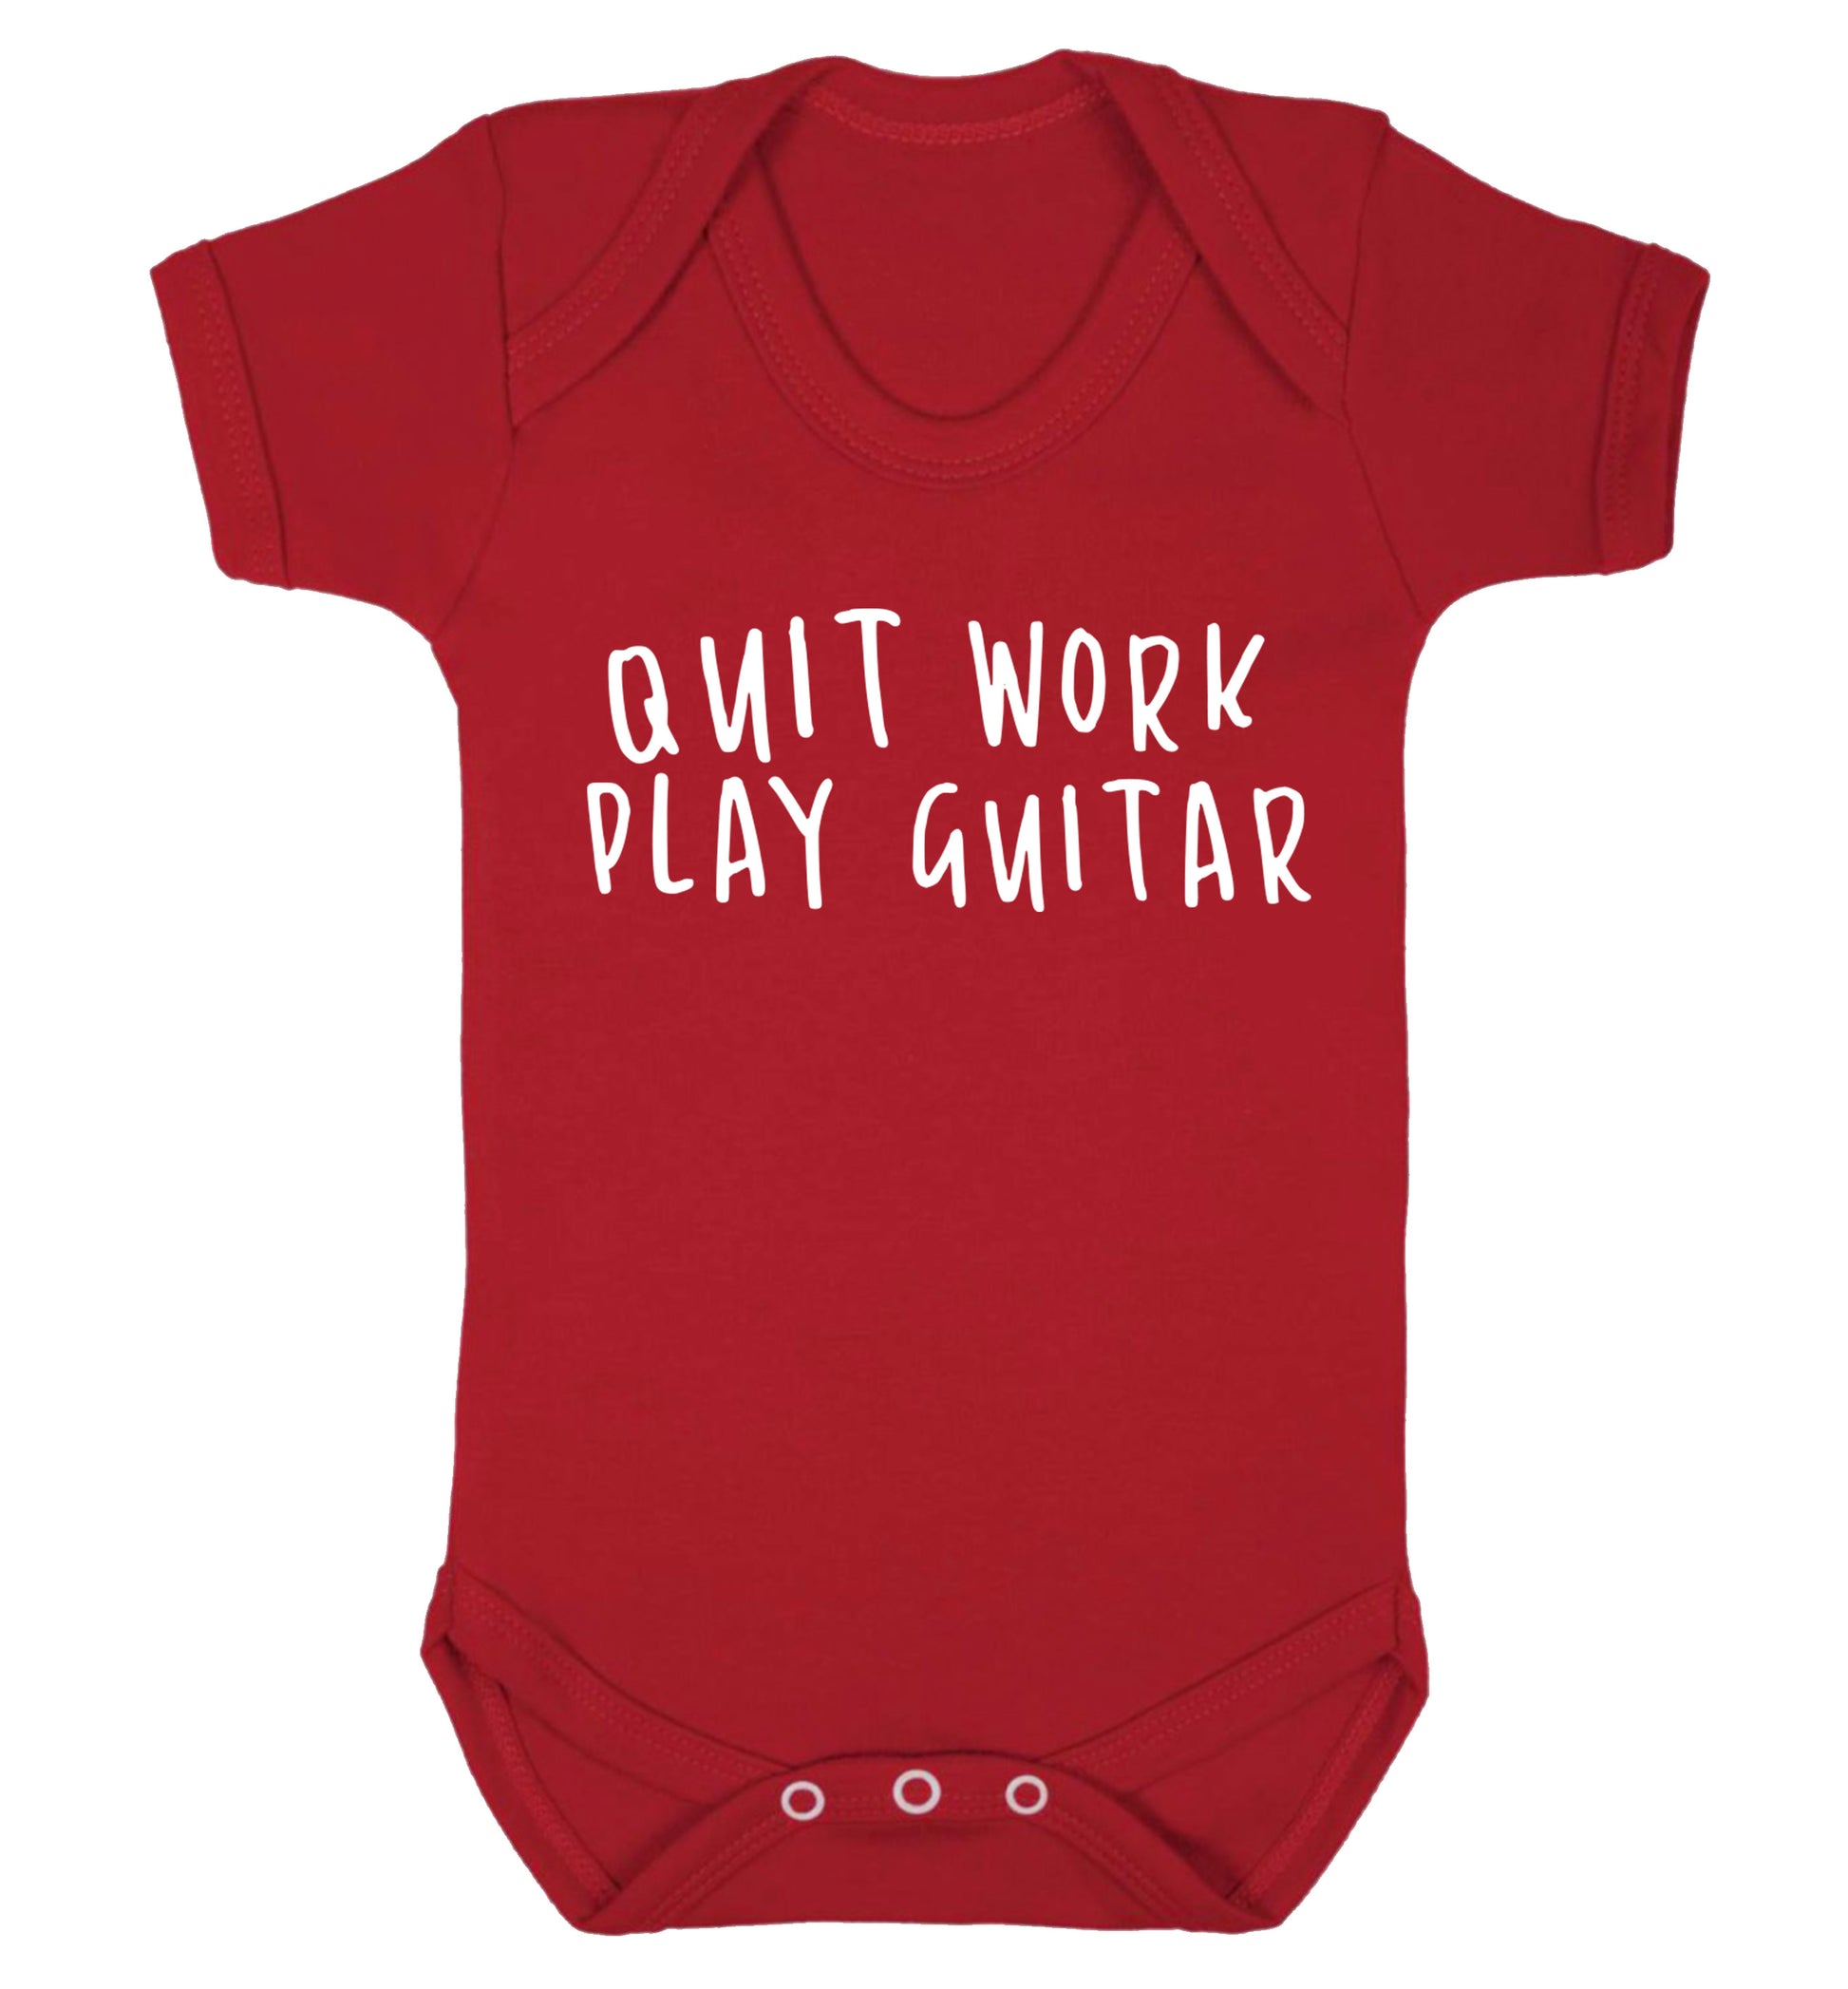 Quit work play guitar Baby Vest red 18-24 months